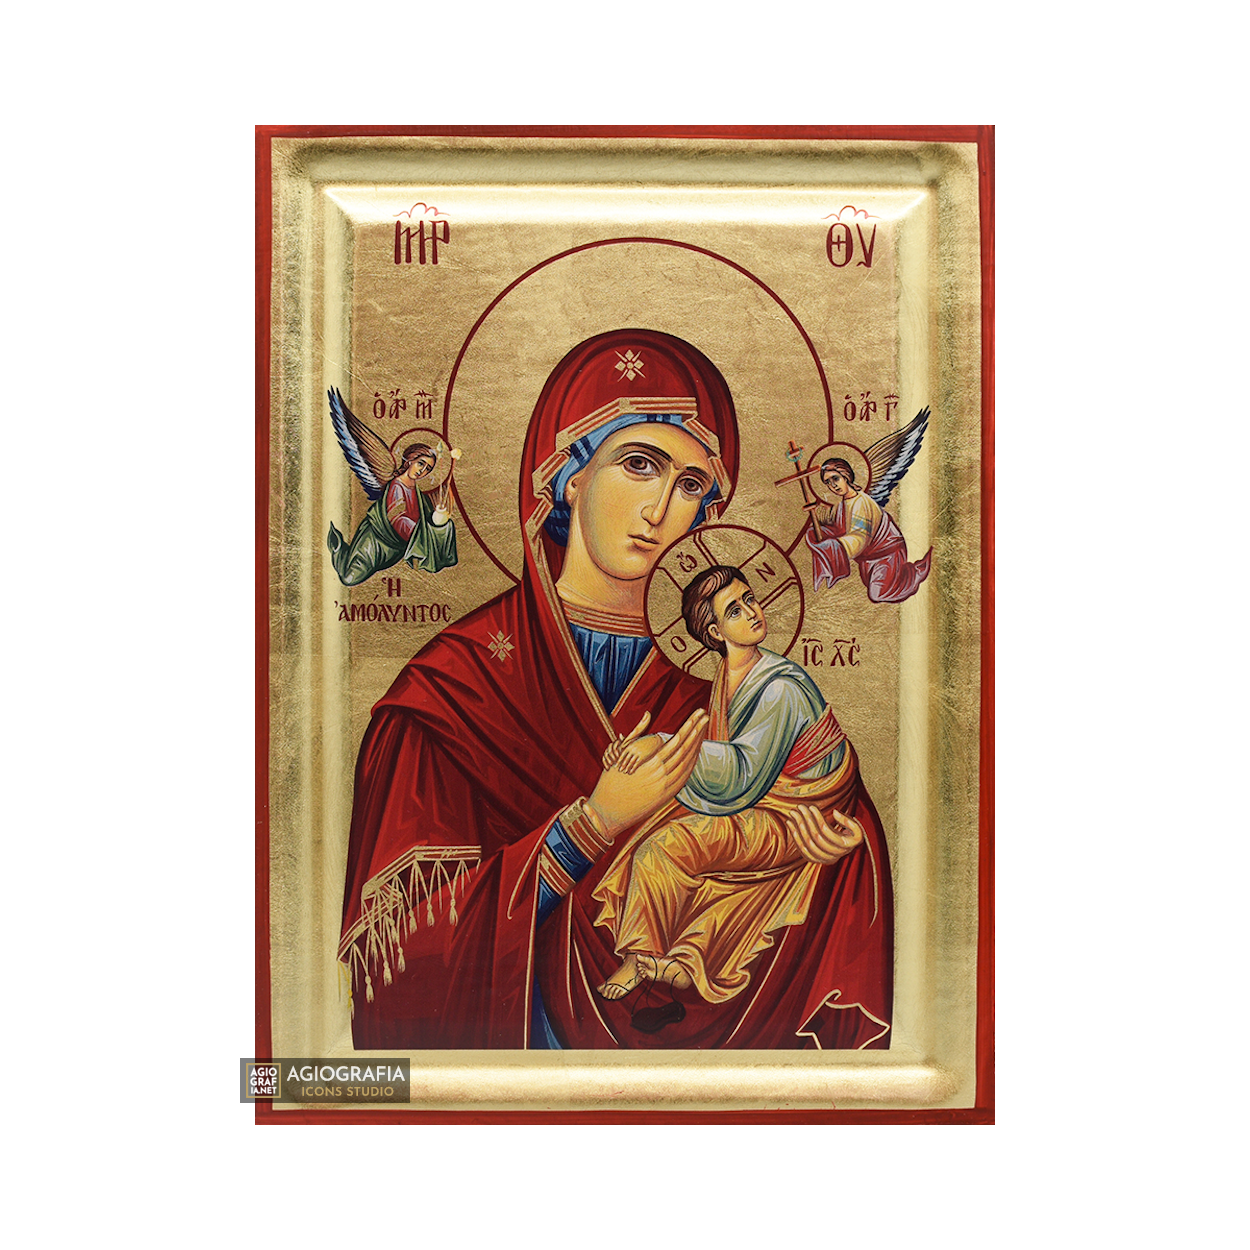 Virgin Mary of Passion (Amolintos) Greek Orthodox Icon with Gold Leaf